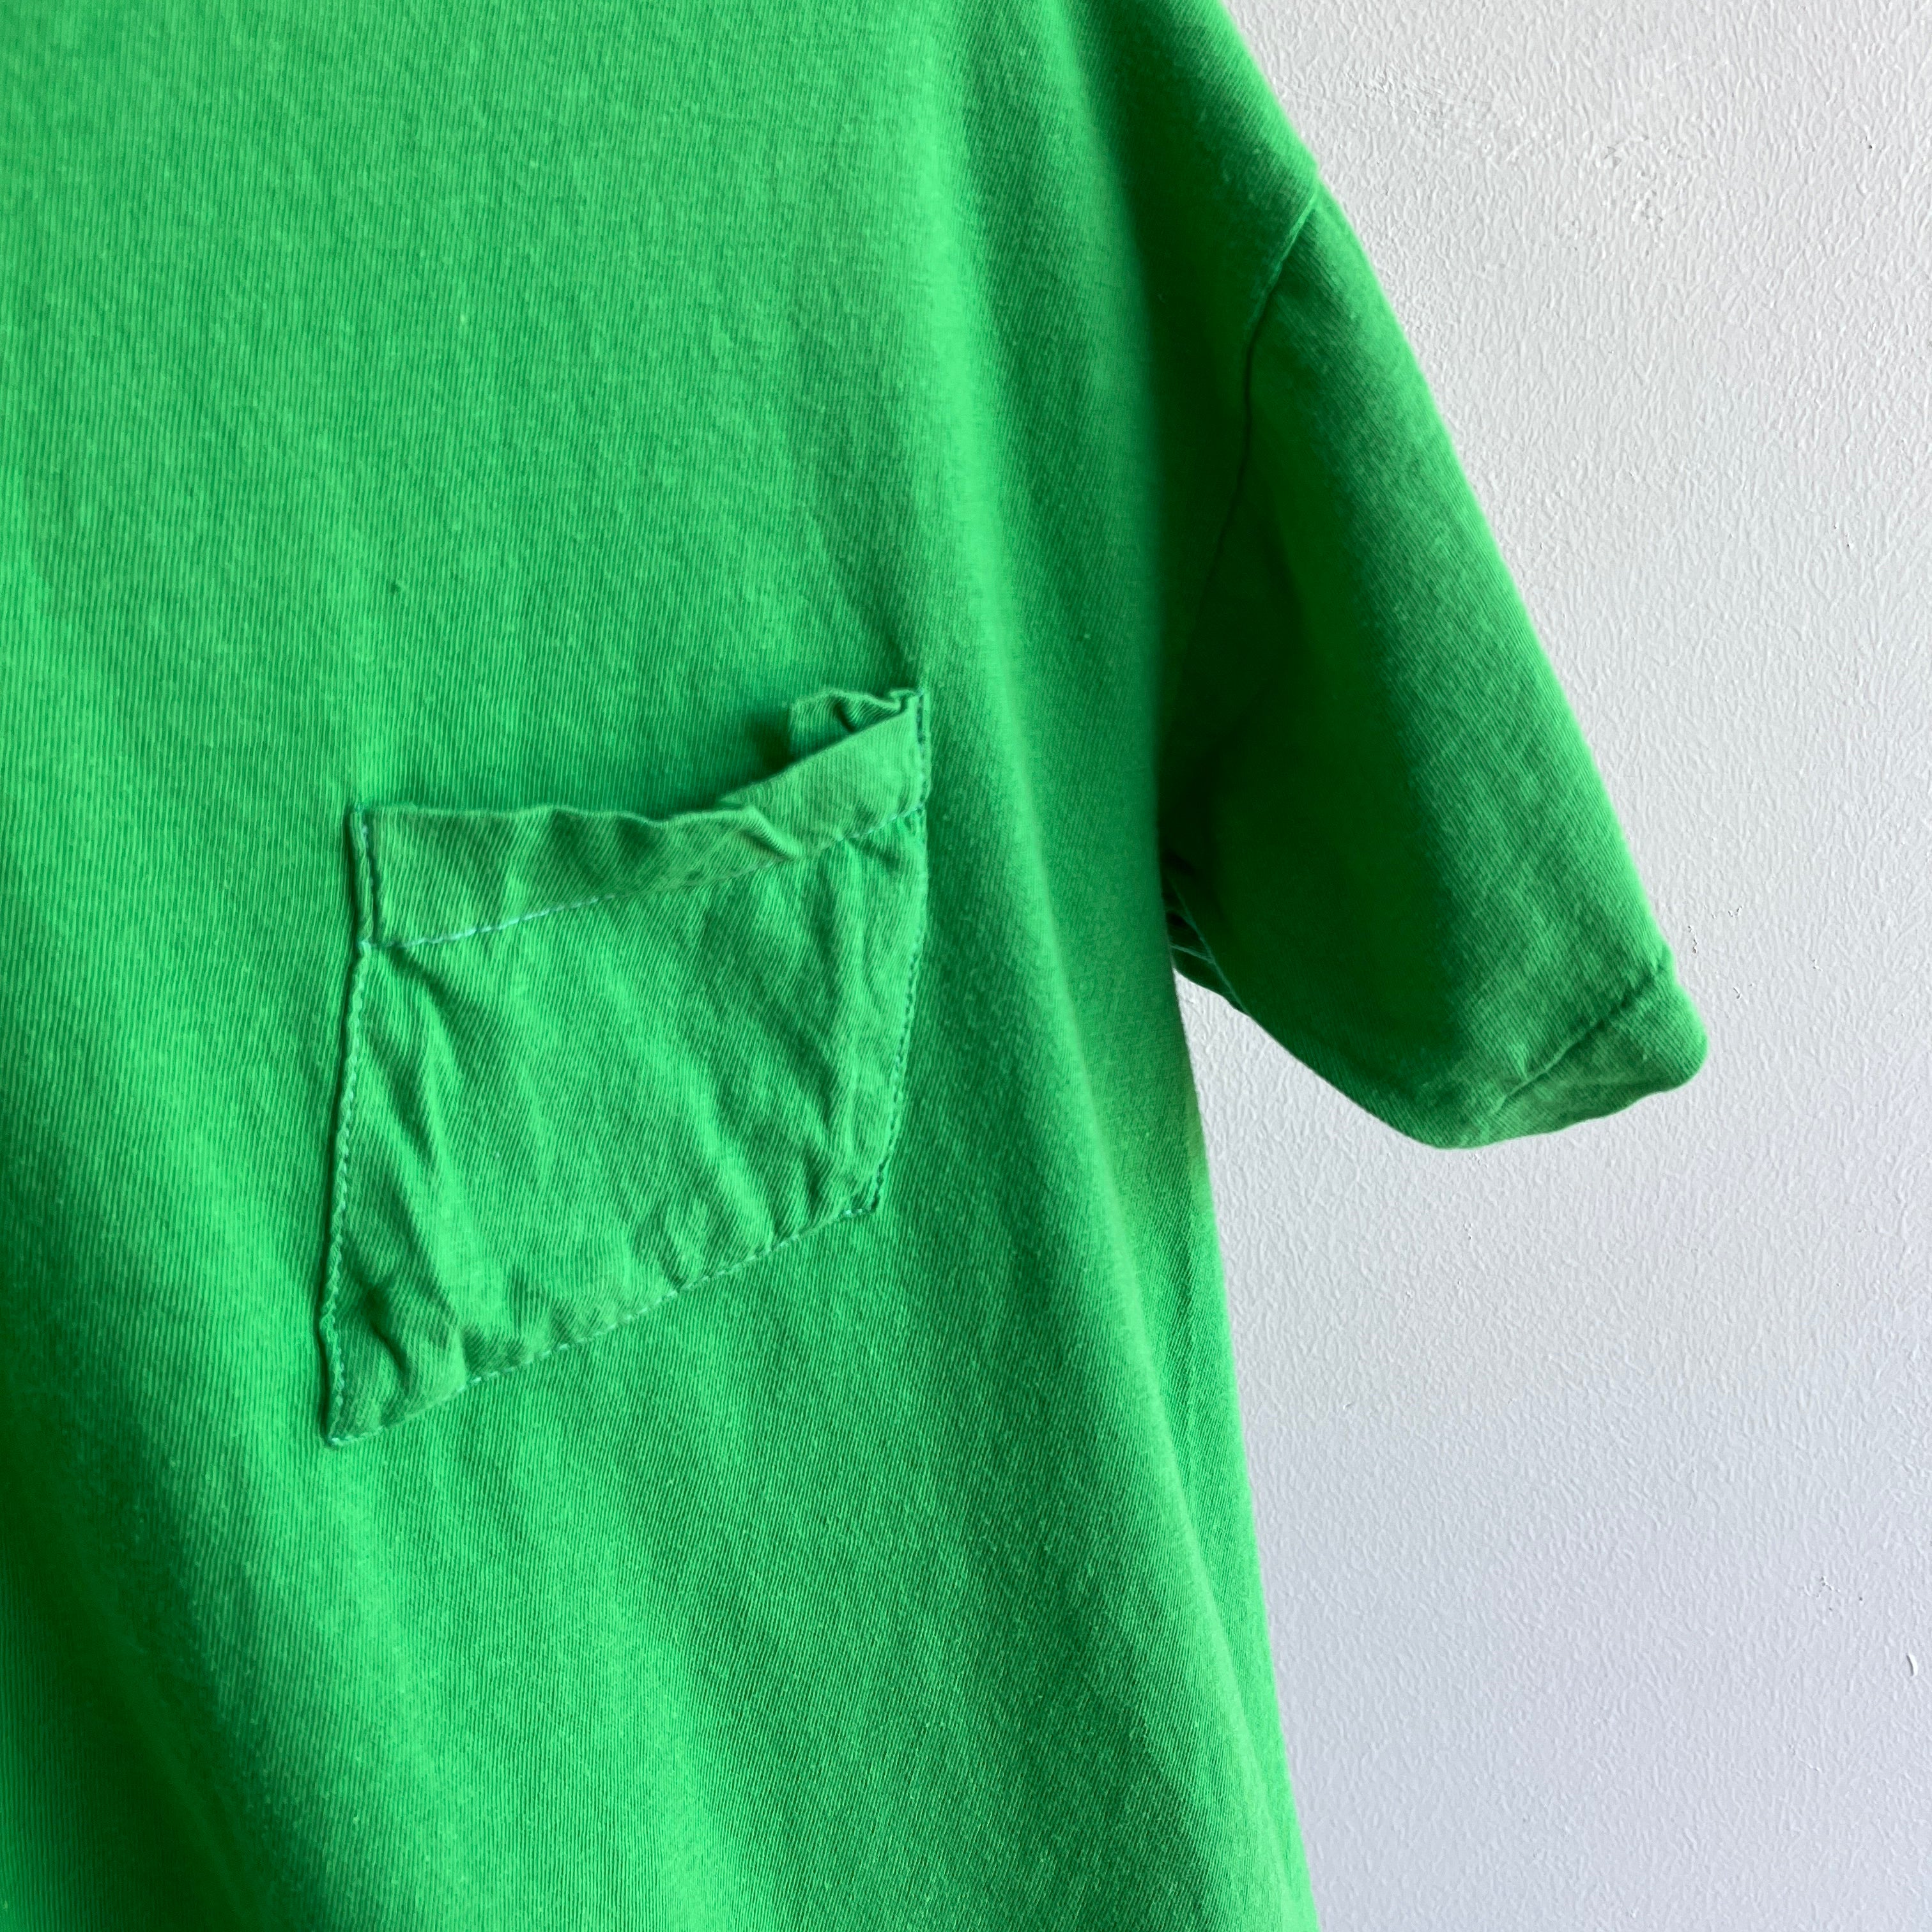 1980s The Slouchiest Kelly Green Pocket Tee Ever Made In The 80s, Maybe